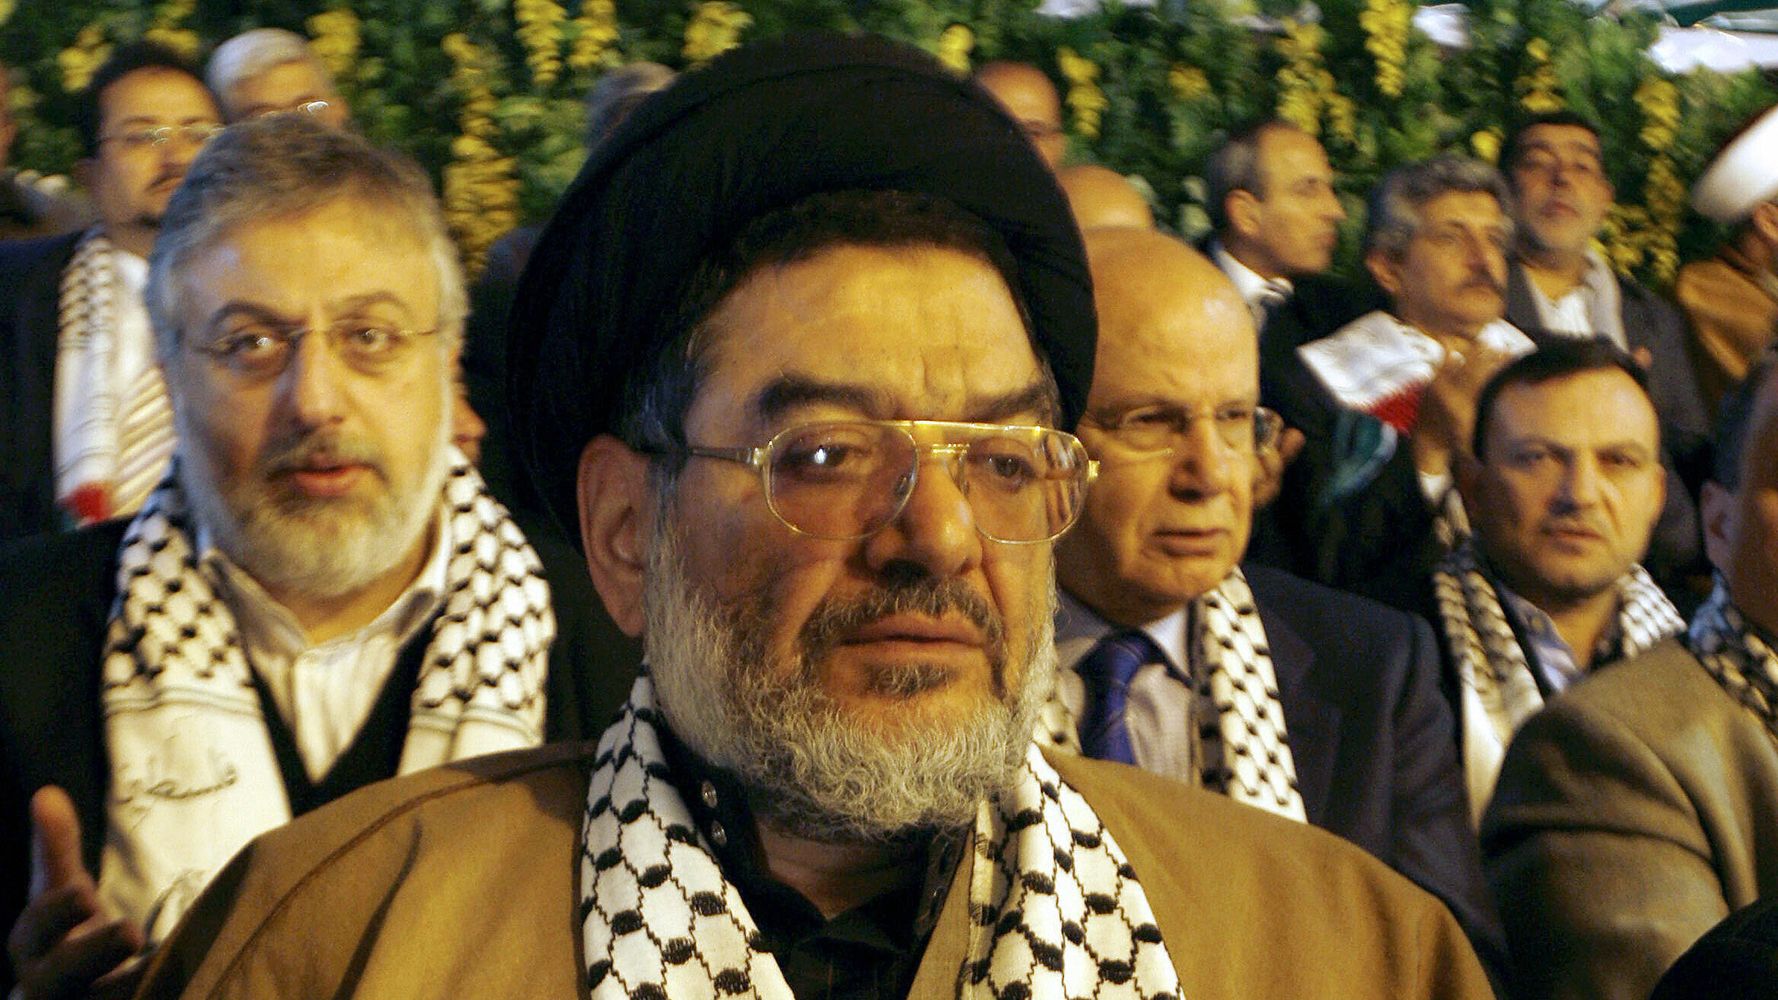 Iran Cleric Who Founded Hezbollah Dies Of COVID-19